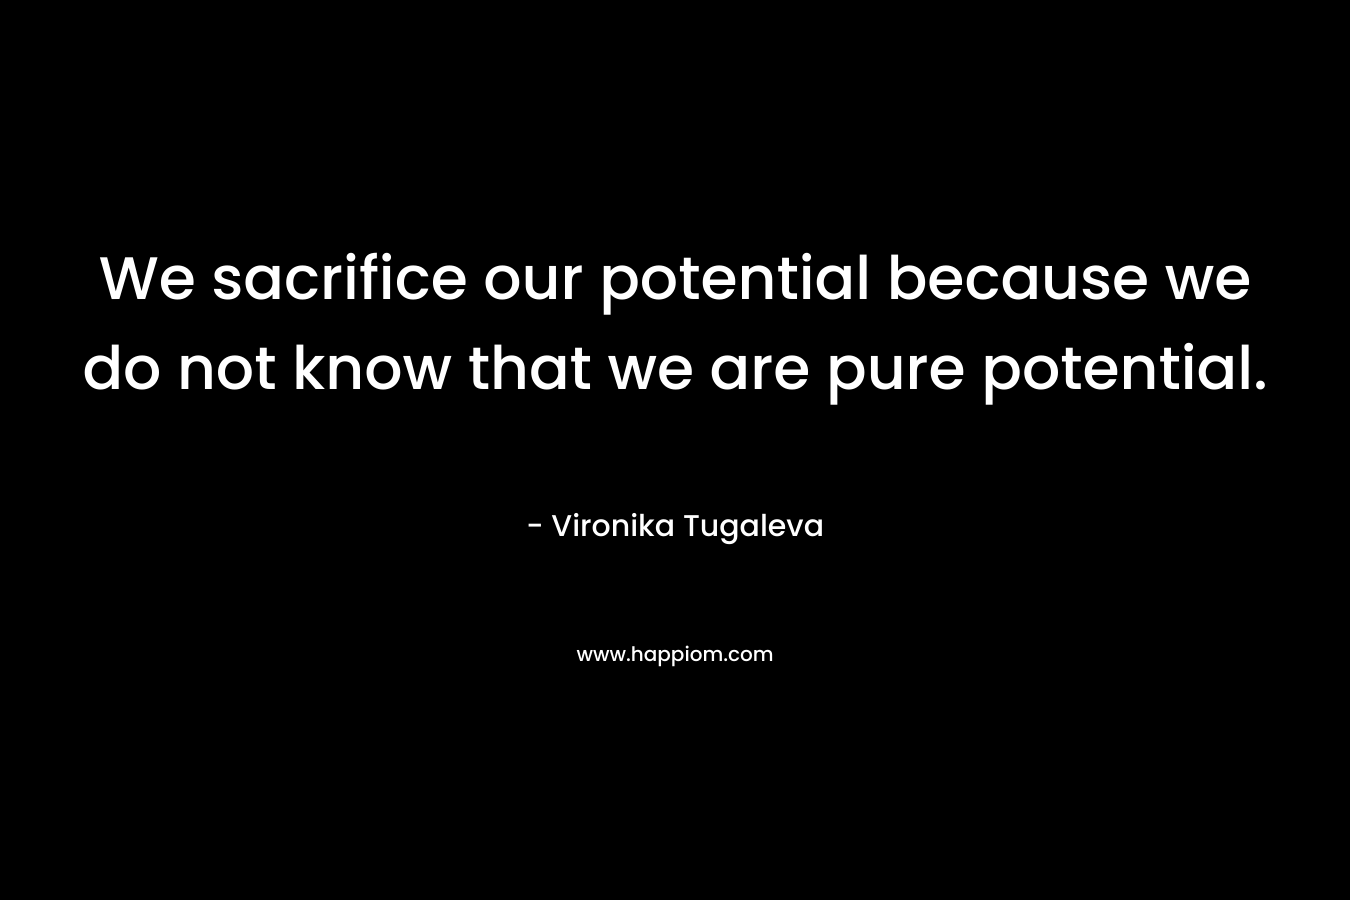 We sacrifice our potential because we do not know that we are pure potential.